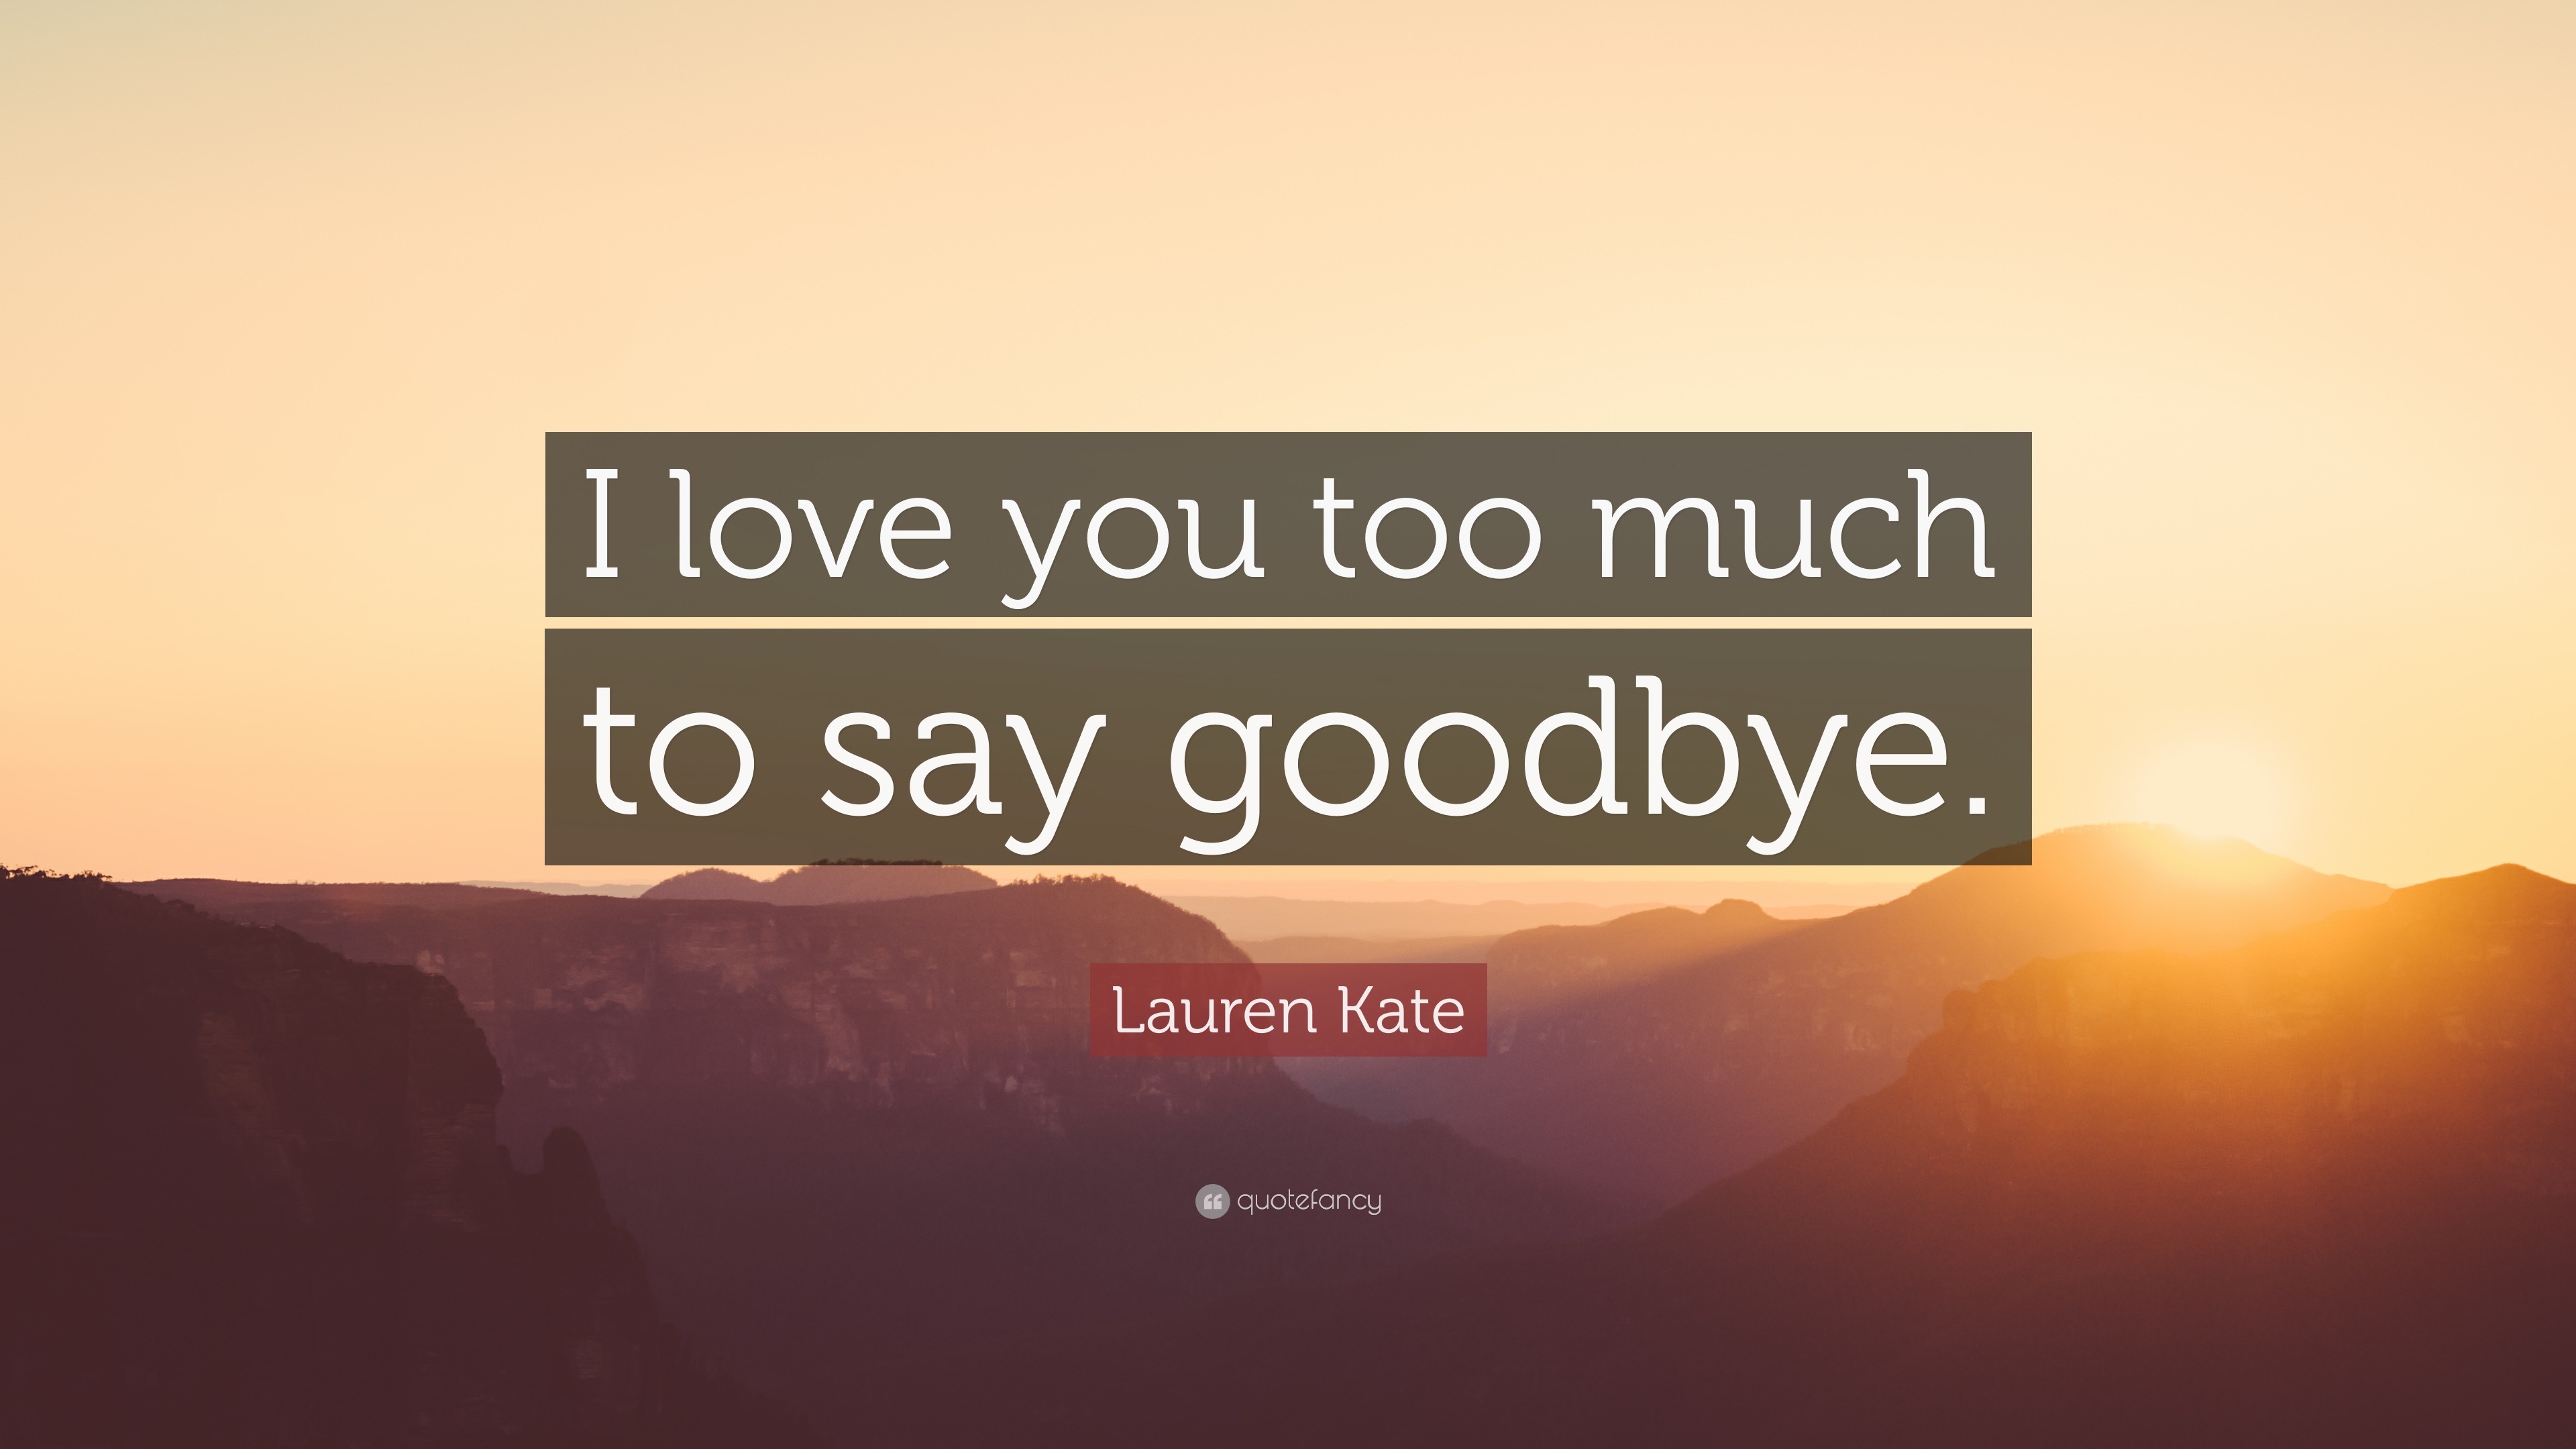 Lauren Kate Quote: “I love you too much to say goodbye.”